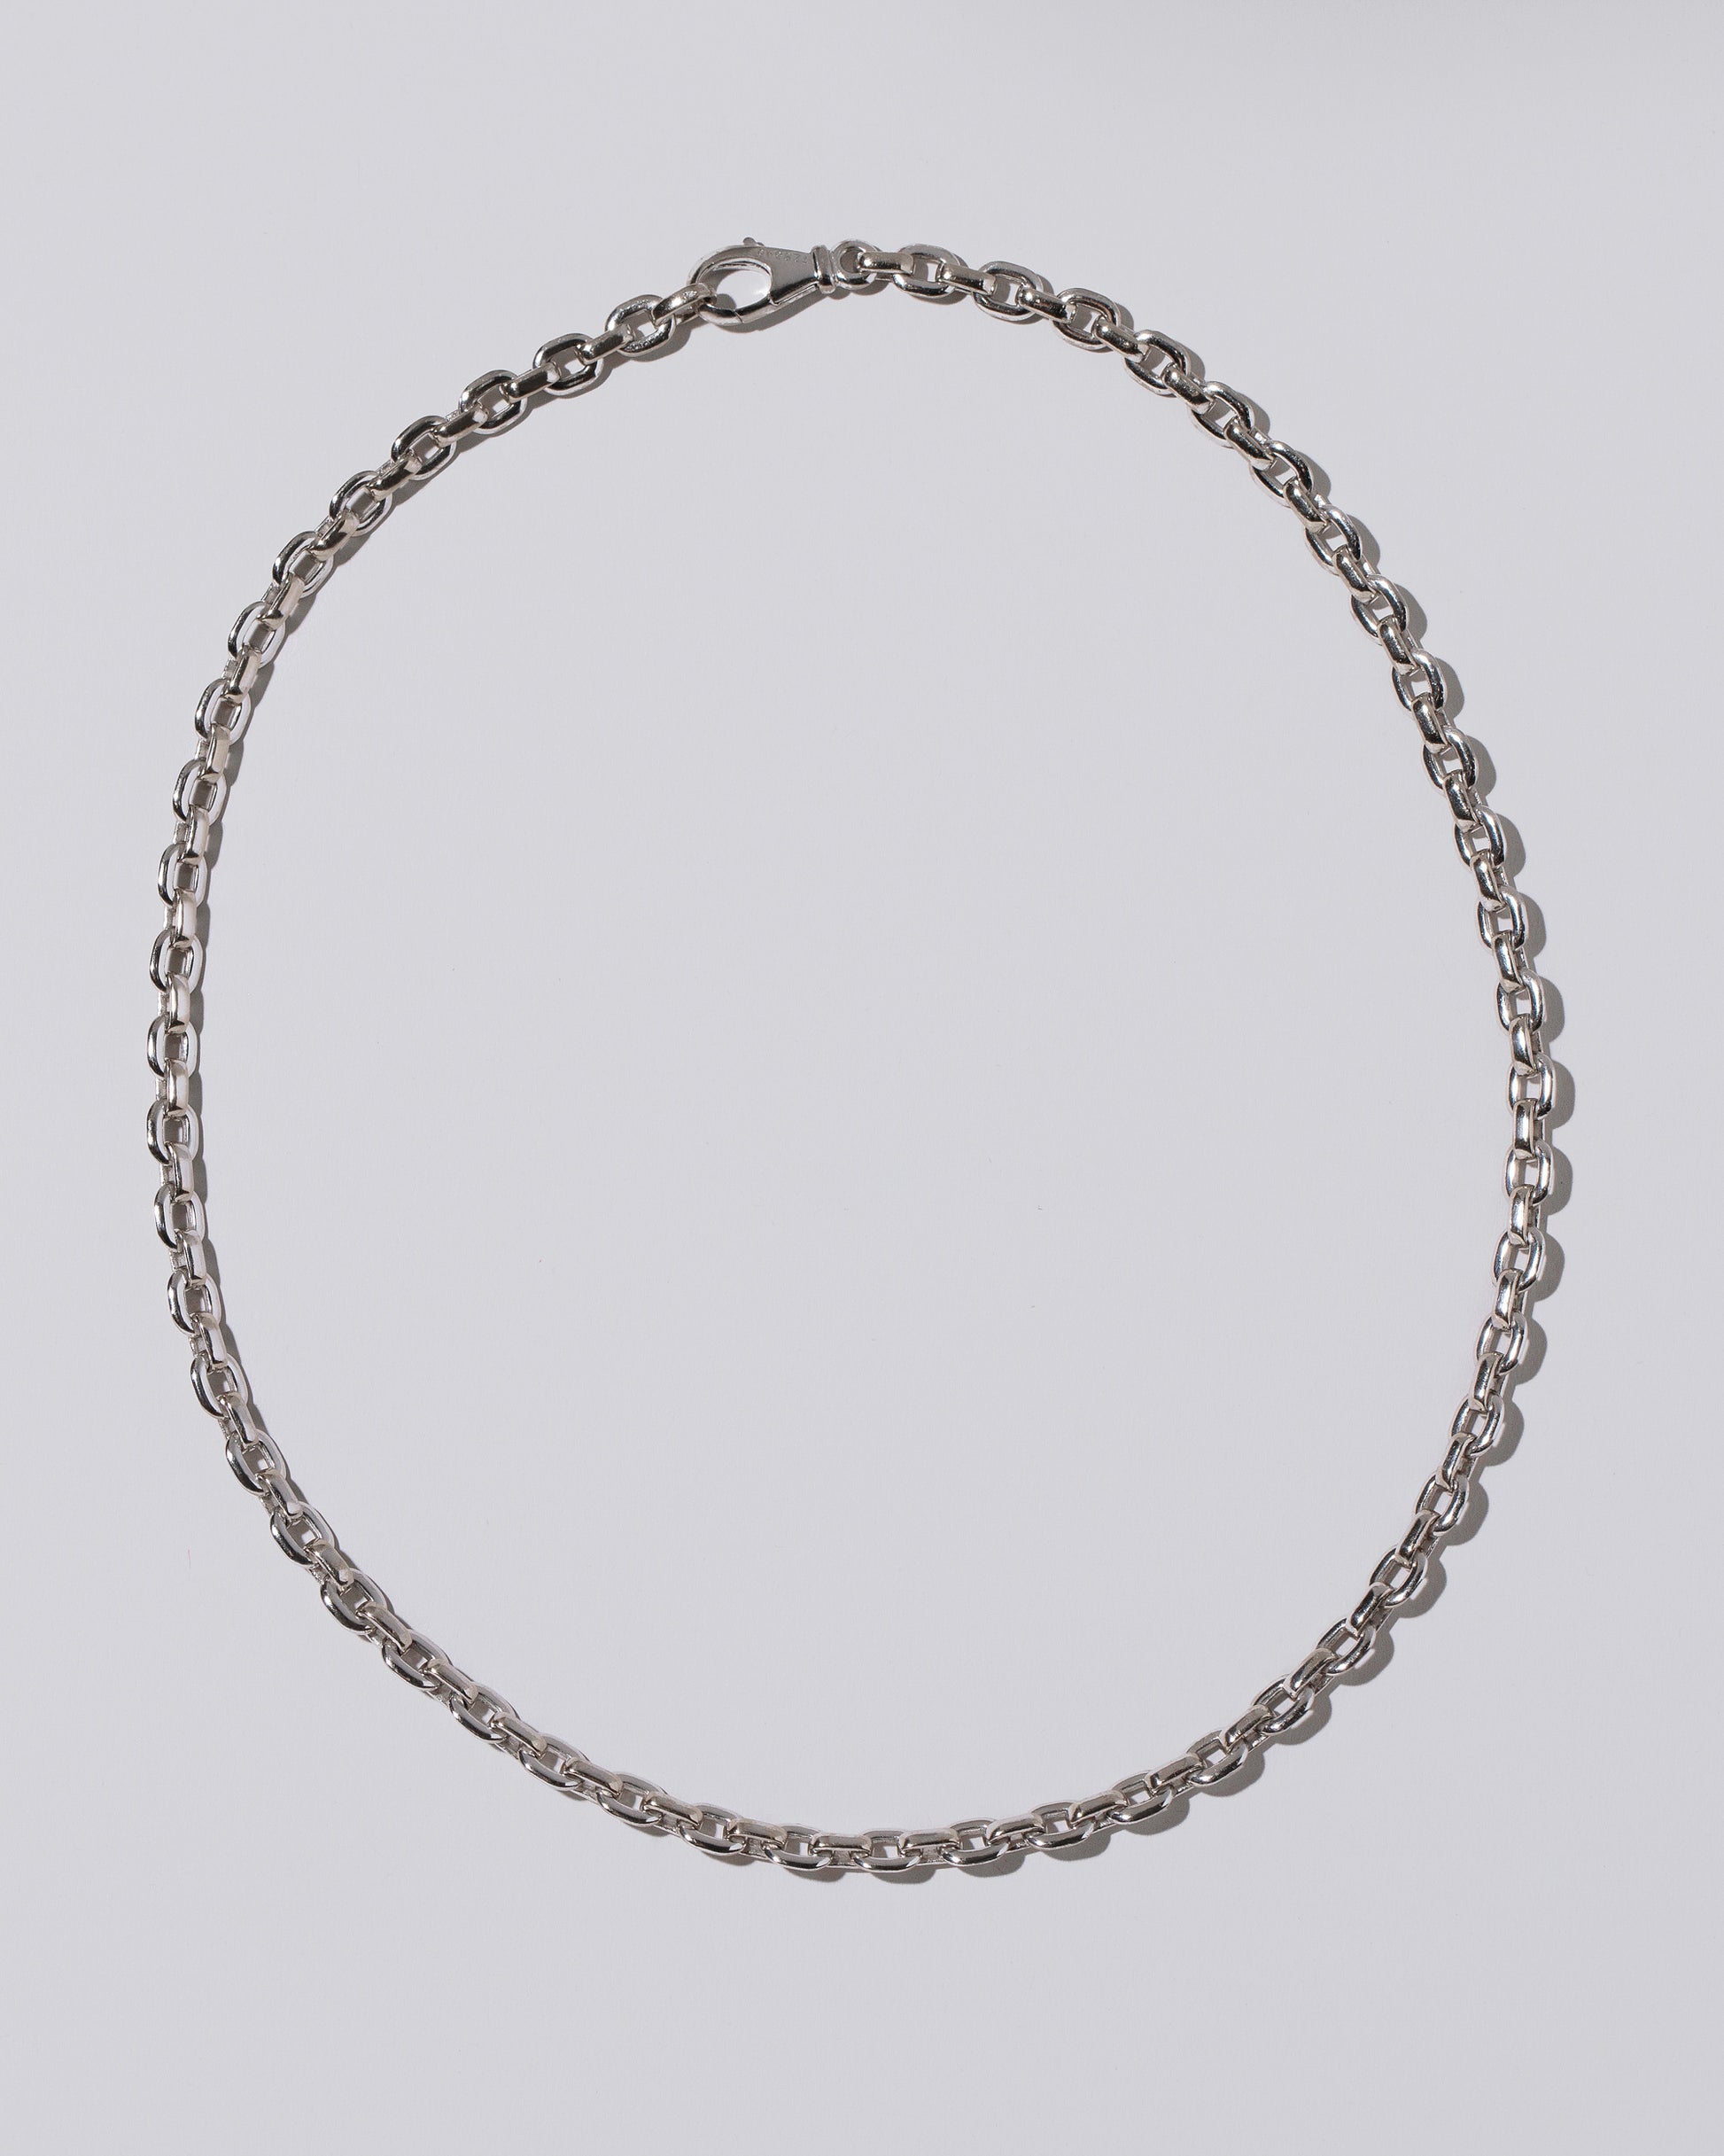 Cartier Oval Cable Chain Necklace on light color background.